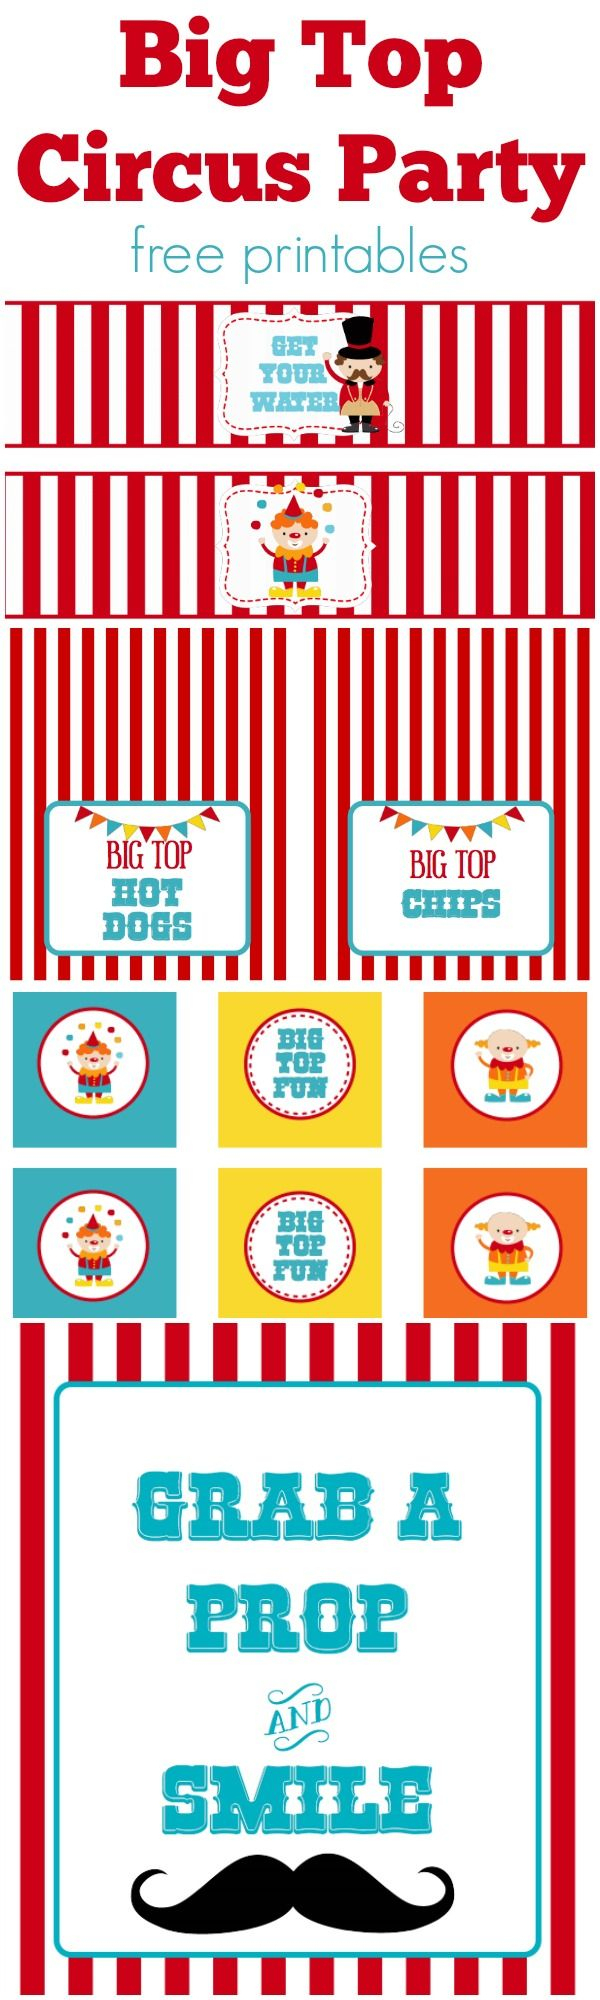 Circus Party | Free Printables | Free Printables | Pinterest - Free Printable Carnival Decorations